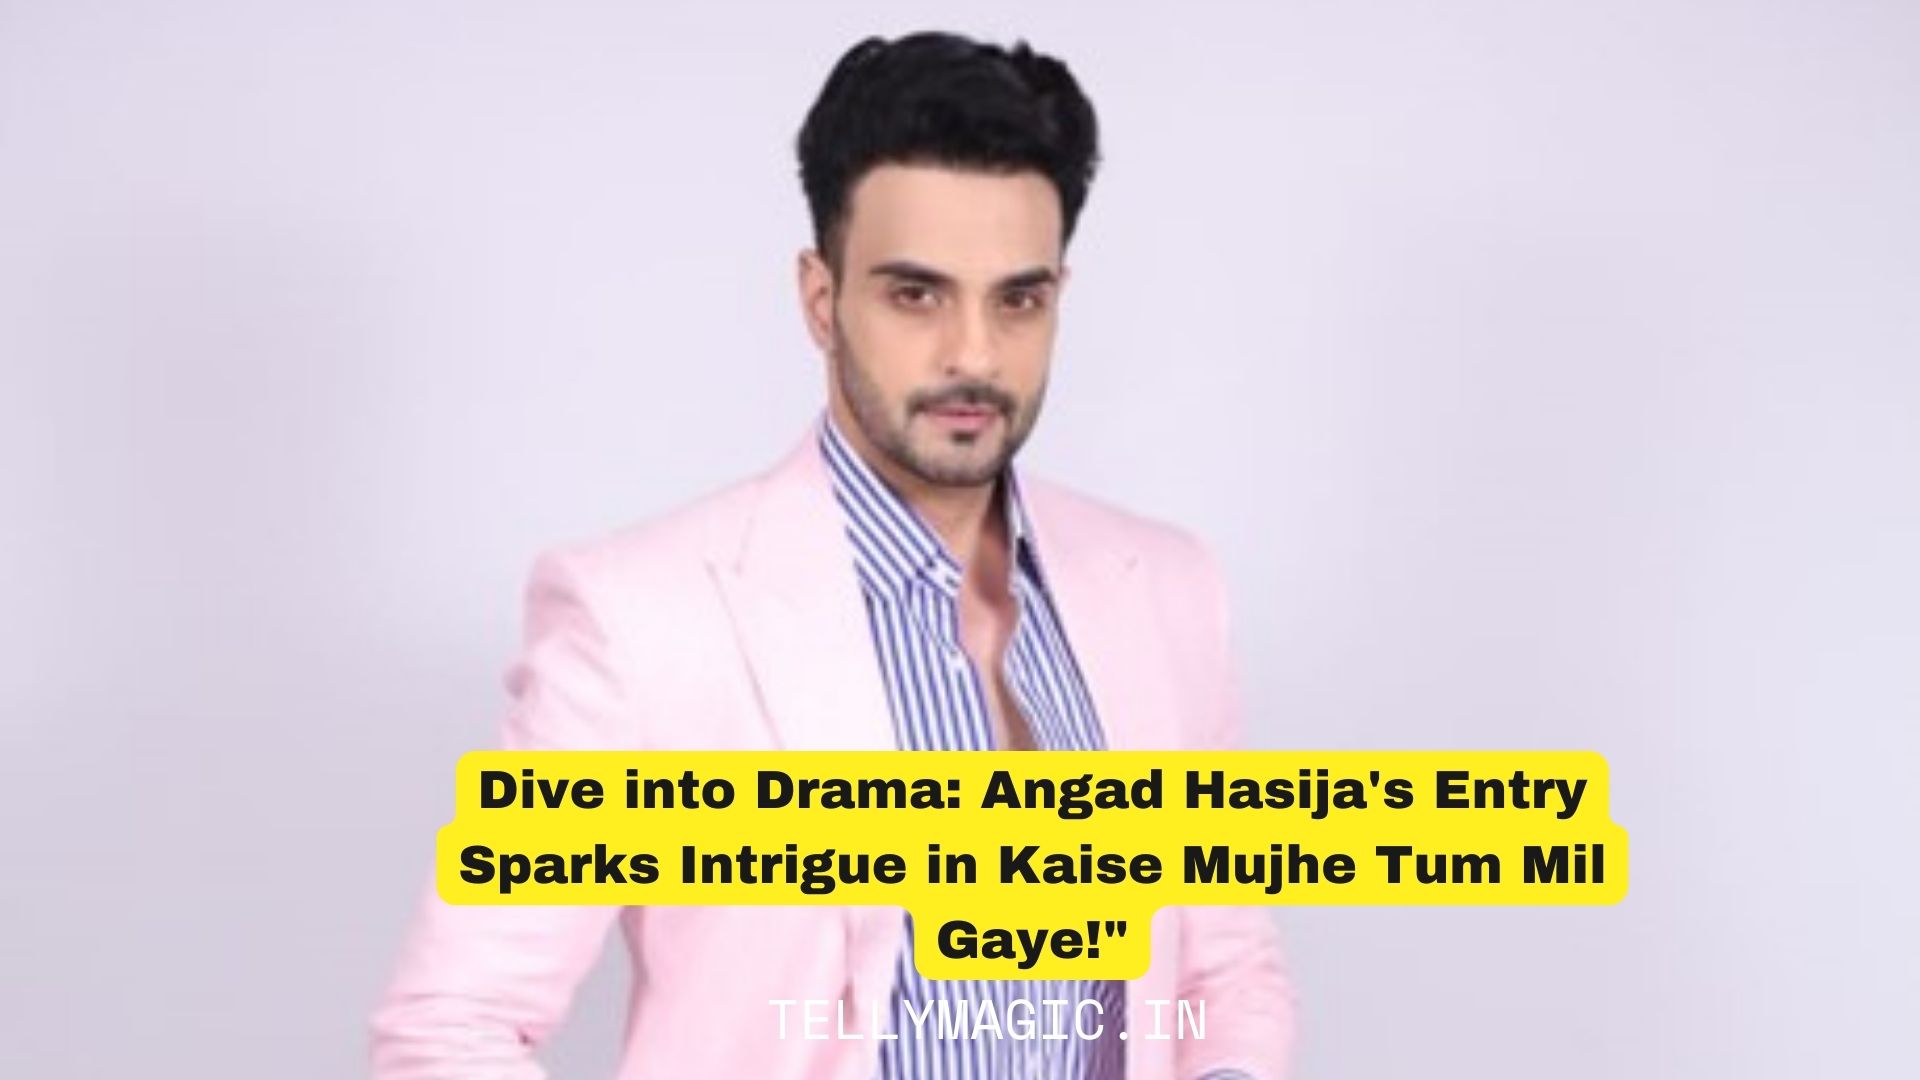 Dive into Drama: Angad Hasija’s Entry Sparks Intrigue in Kaise Mujhe Tum Mil Gaye!